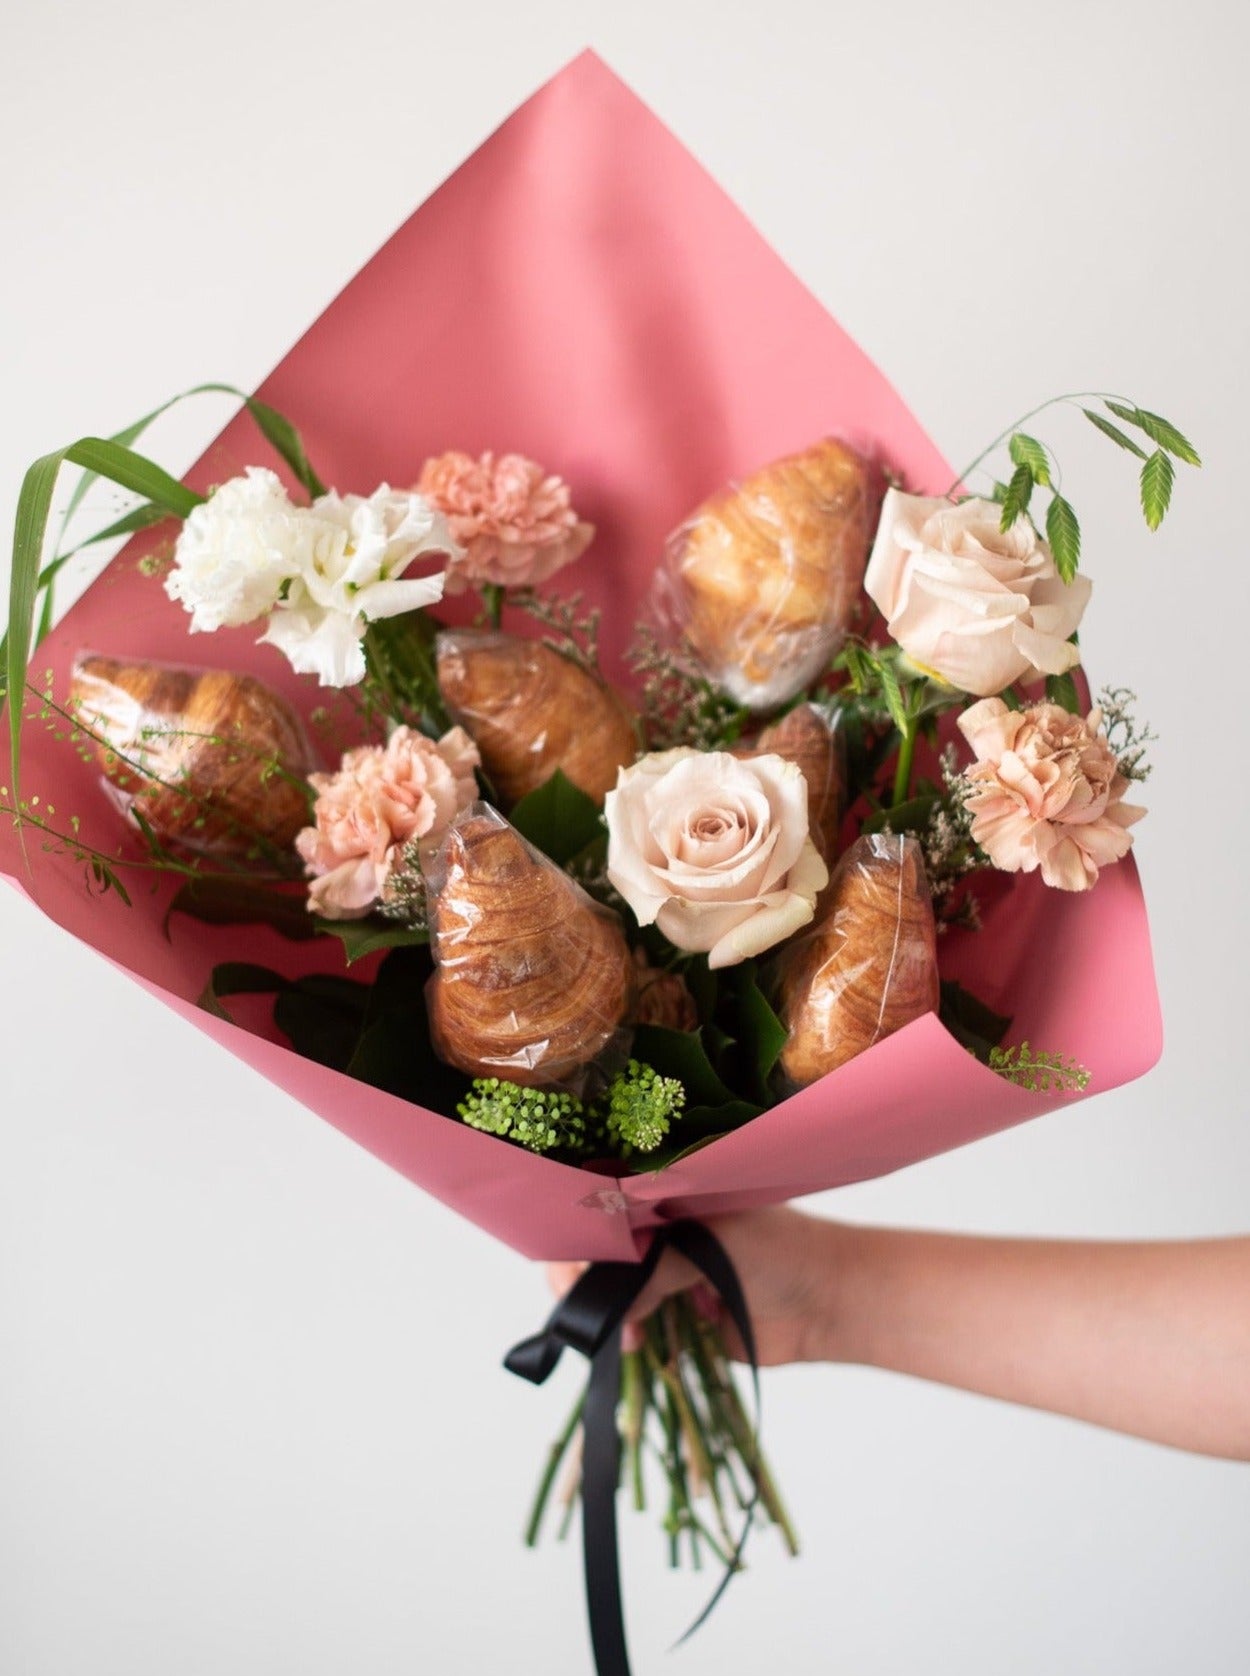 Fresh baked croissants and flowers styled into a modern bouquet